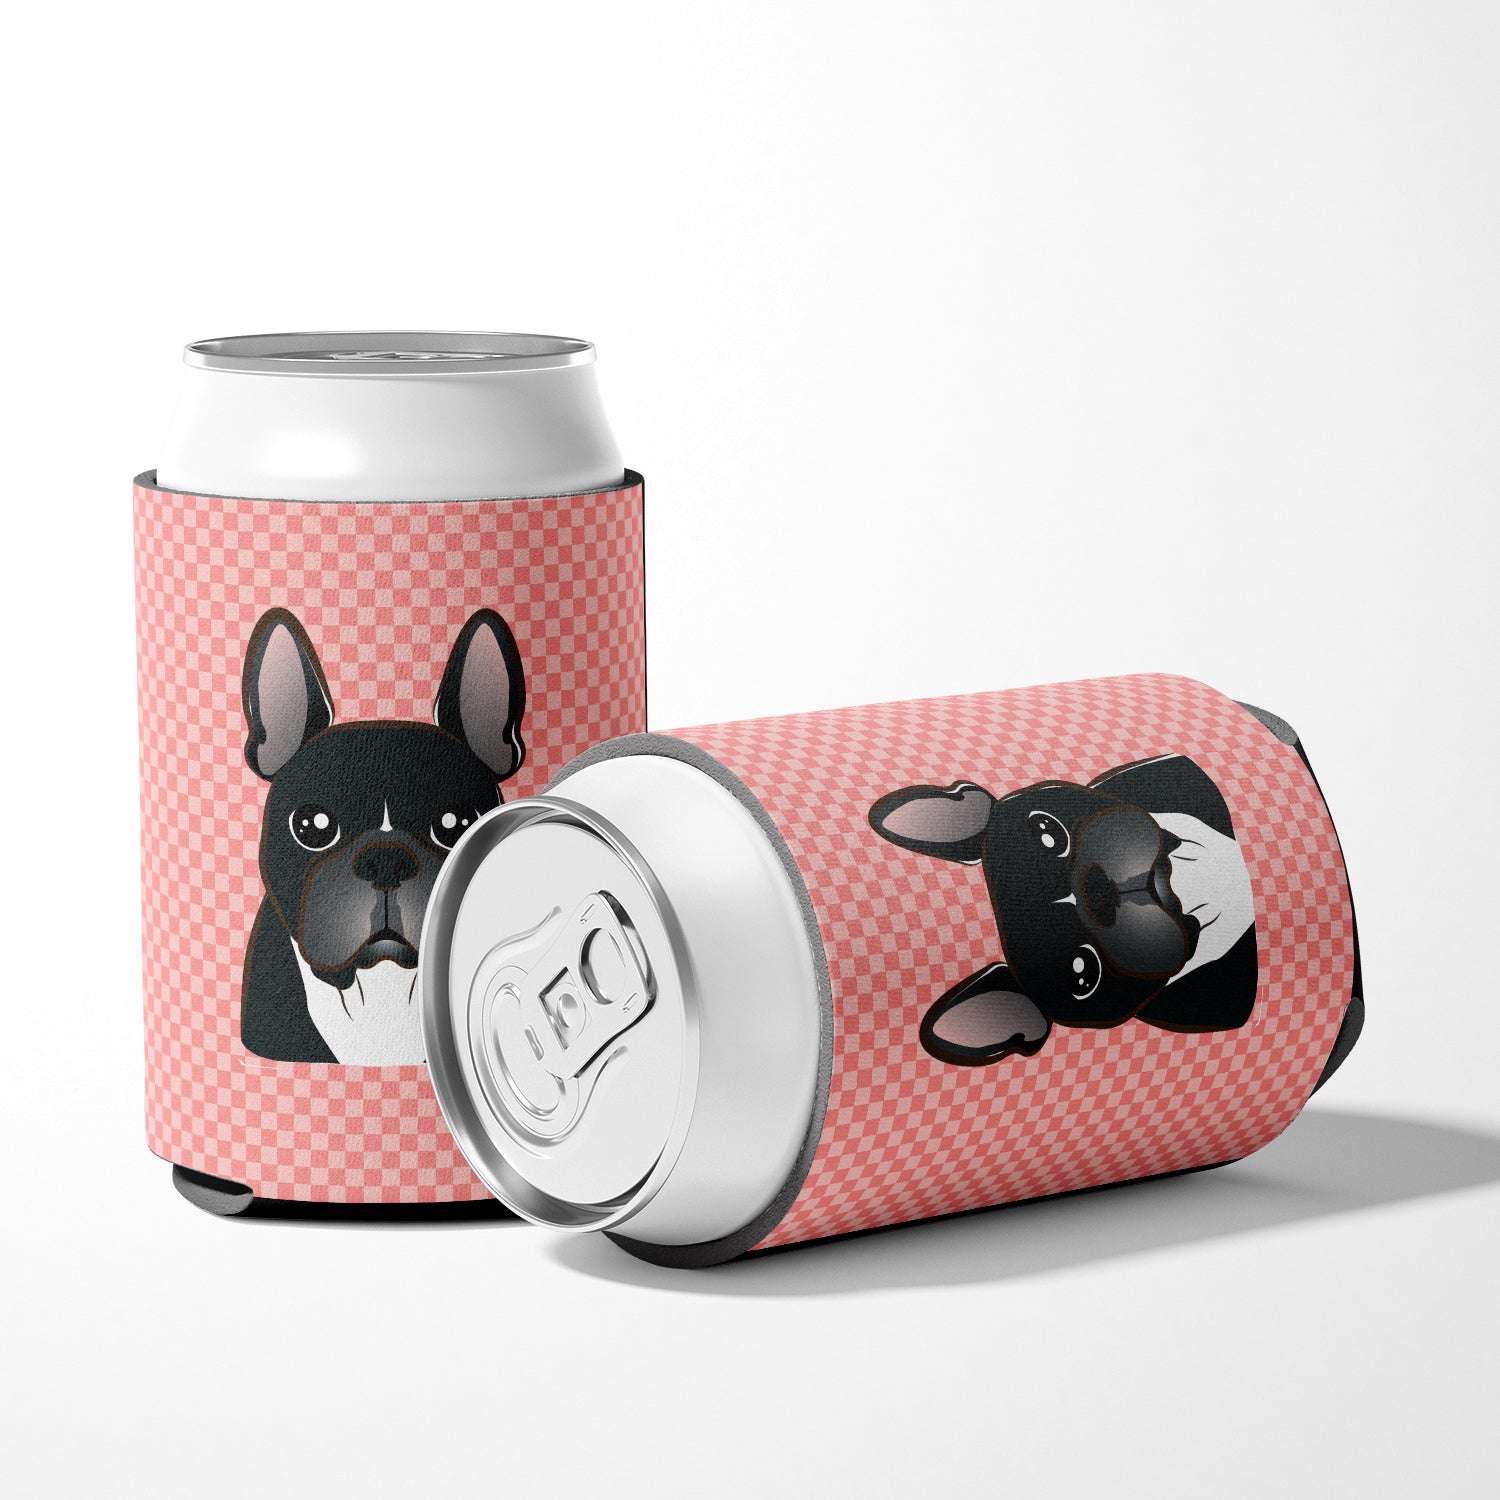 Checkerboard Pink French Bulldog Can or Bottle Hugger BB1227CC.